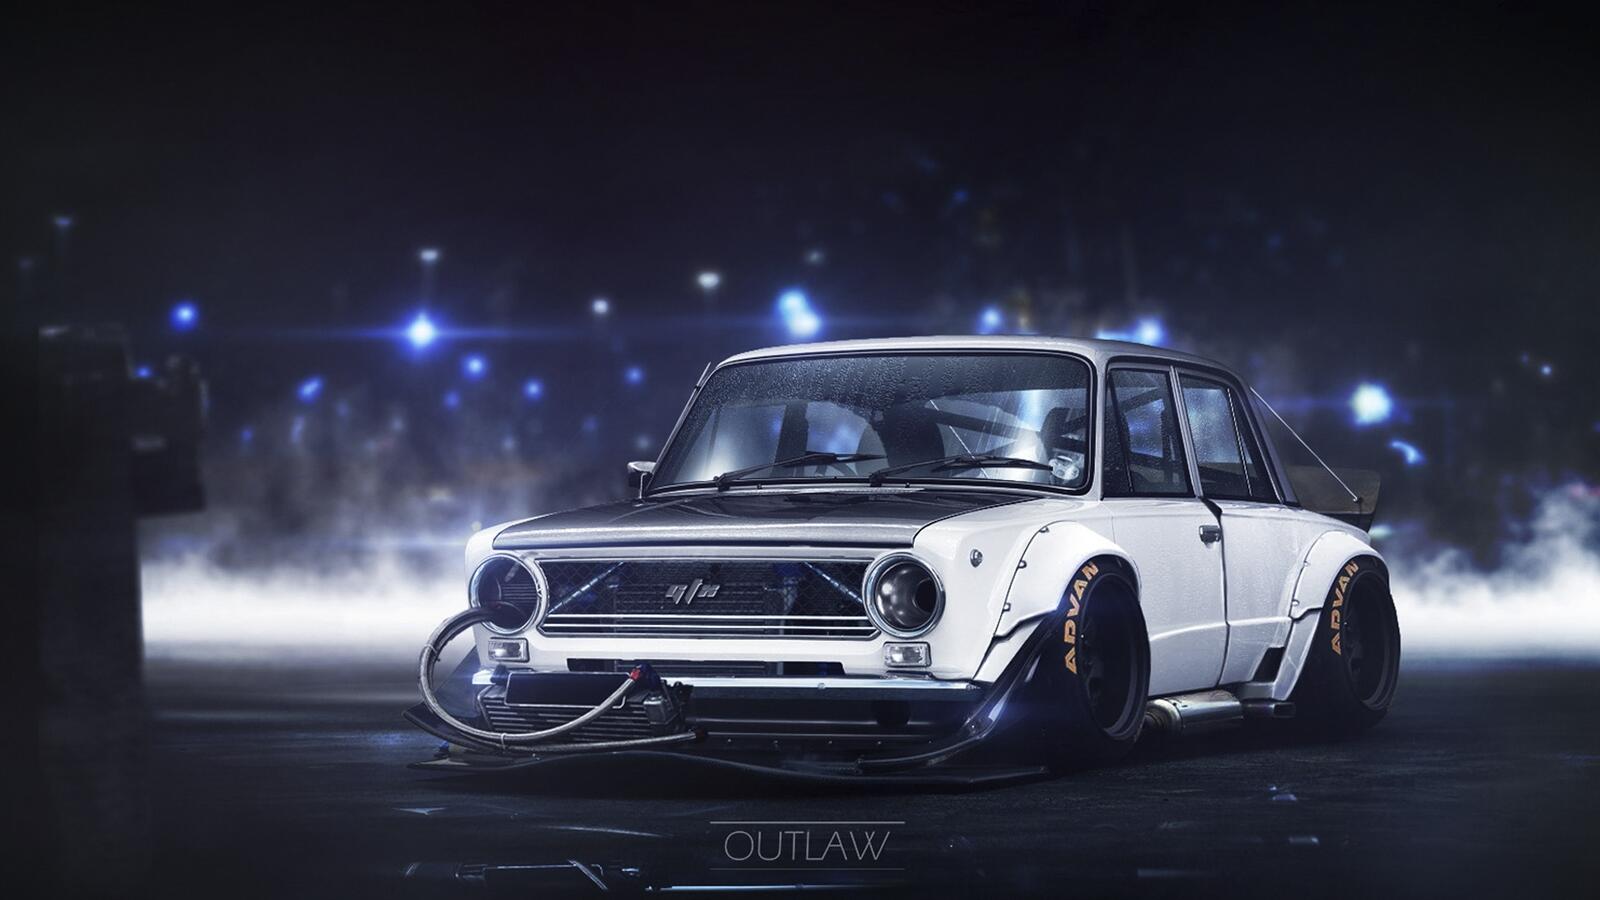 Wallpapers Lada penny tuning on the desktop